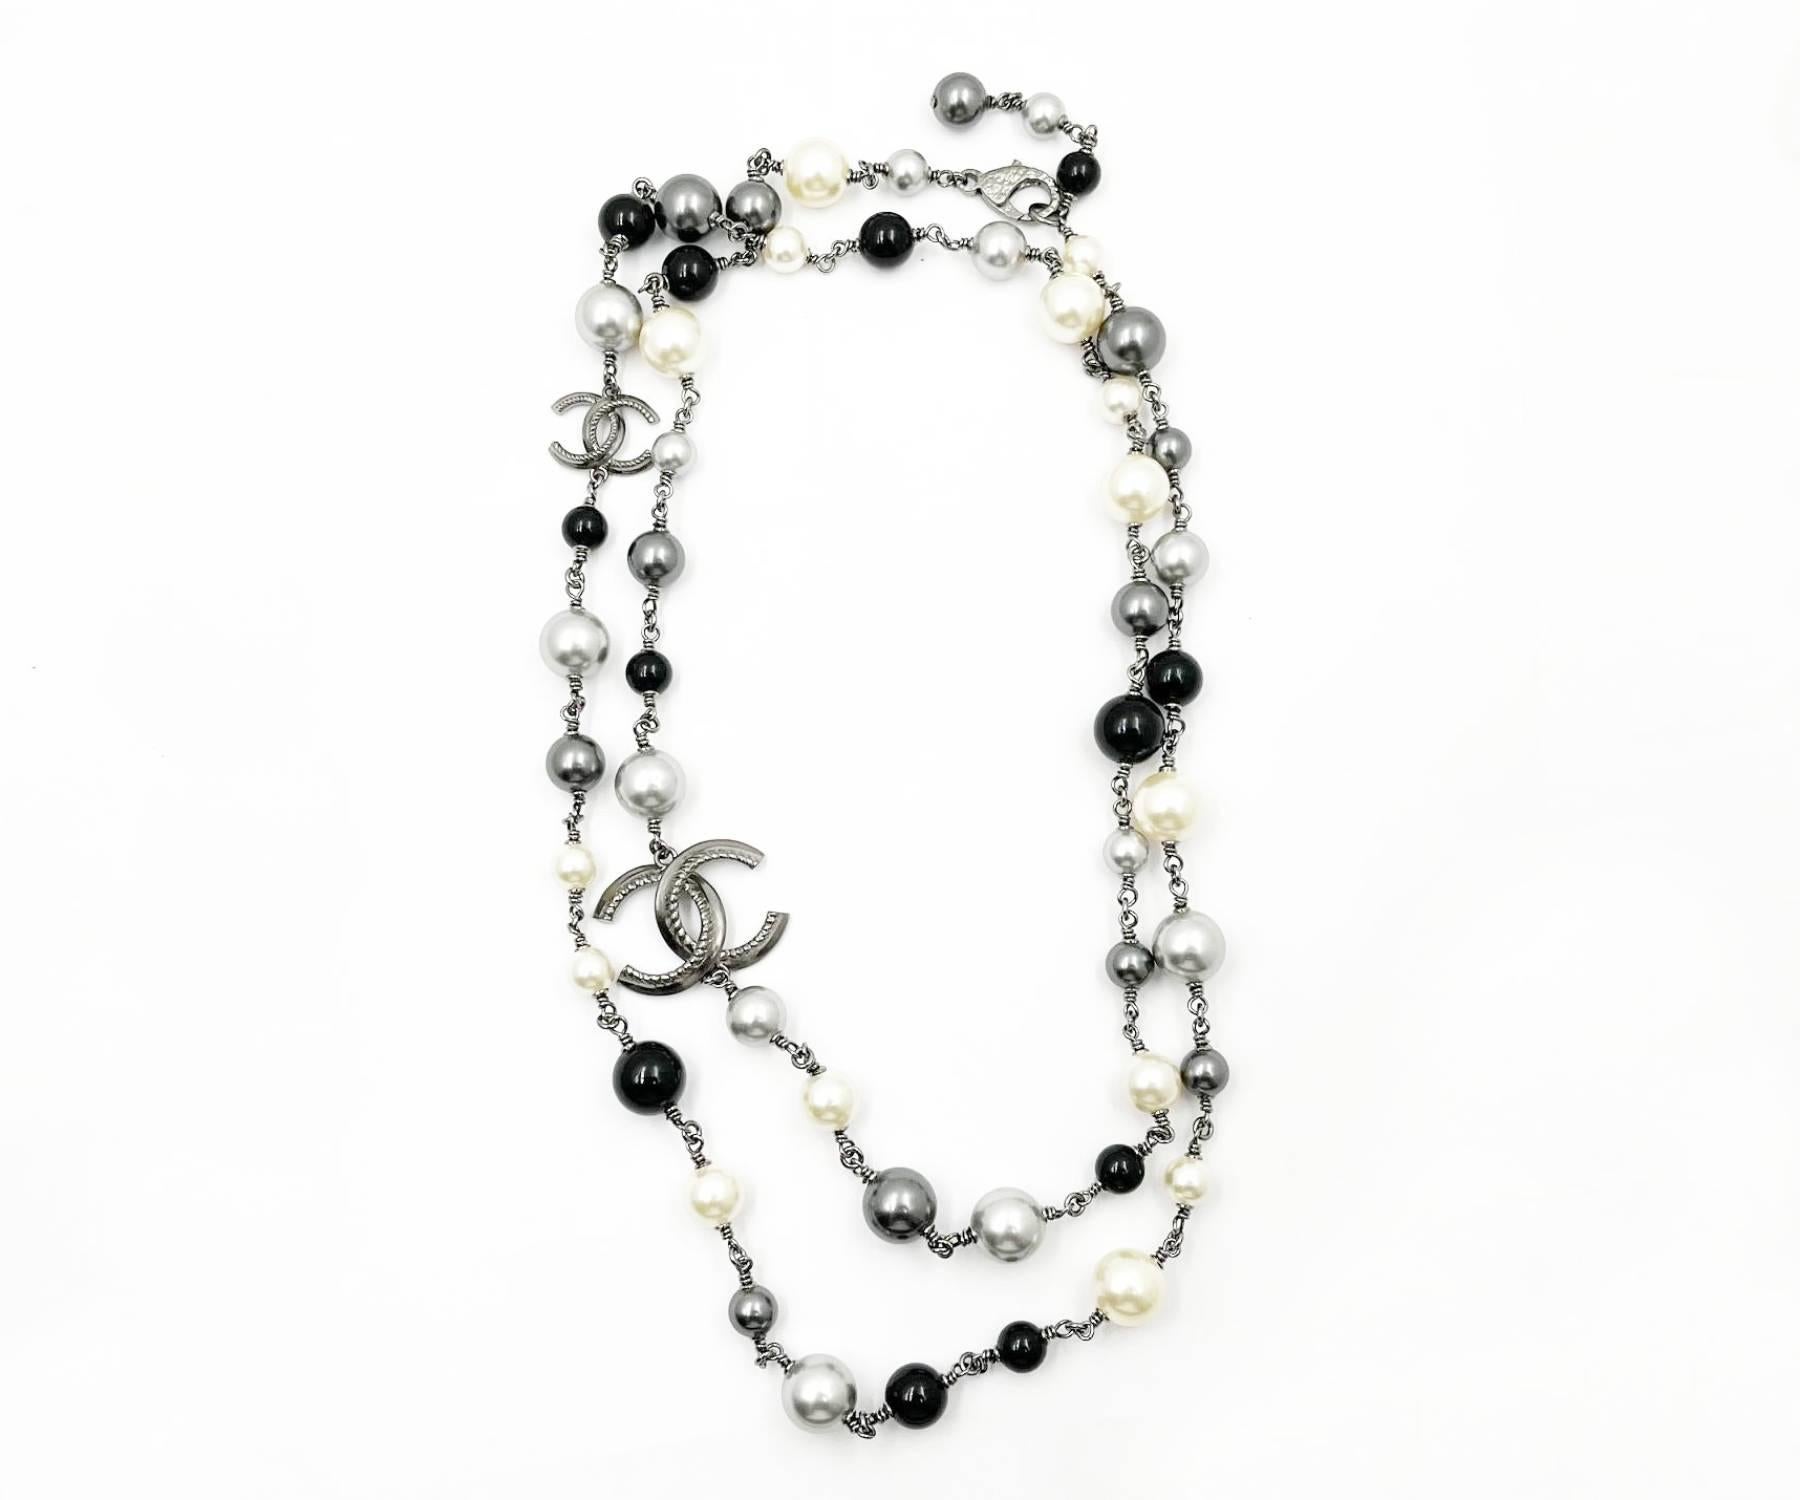 Chanel Gunmetal Rope CC Black Bead Pearl Necklace

*Marked 11
*Made in France
*Comes with original box

-The total length is approximately 44″.
-The largest CC is approximately 1.25″ x 1.1″.
-Wear it as a long necklace or wrap it double as a short